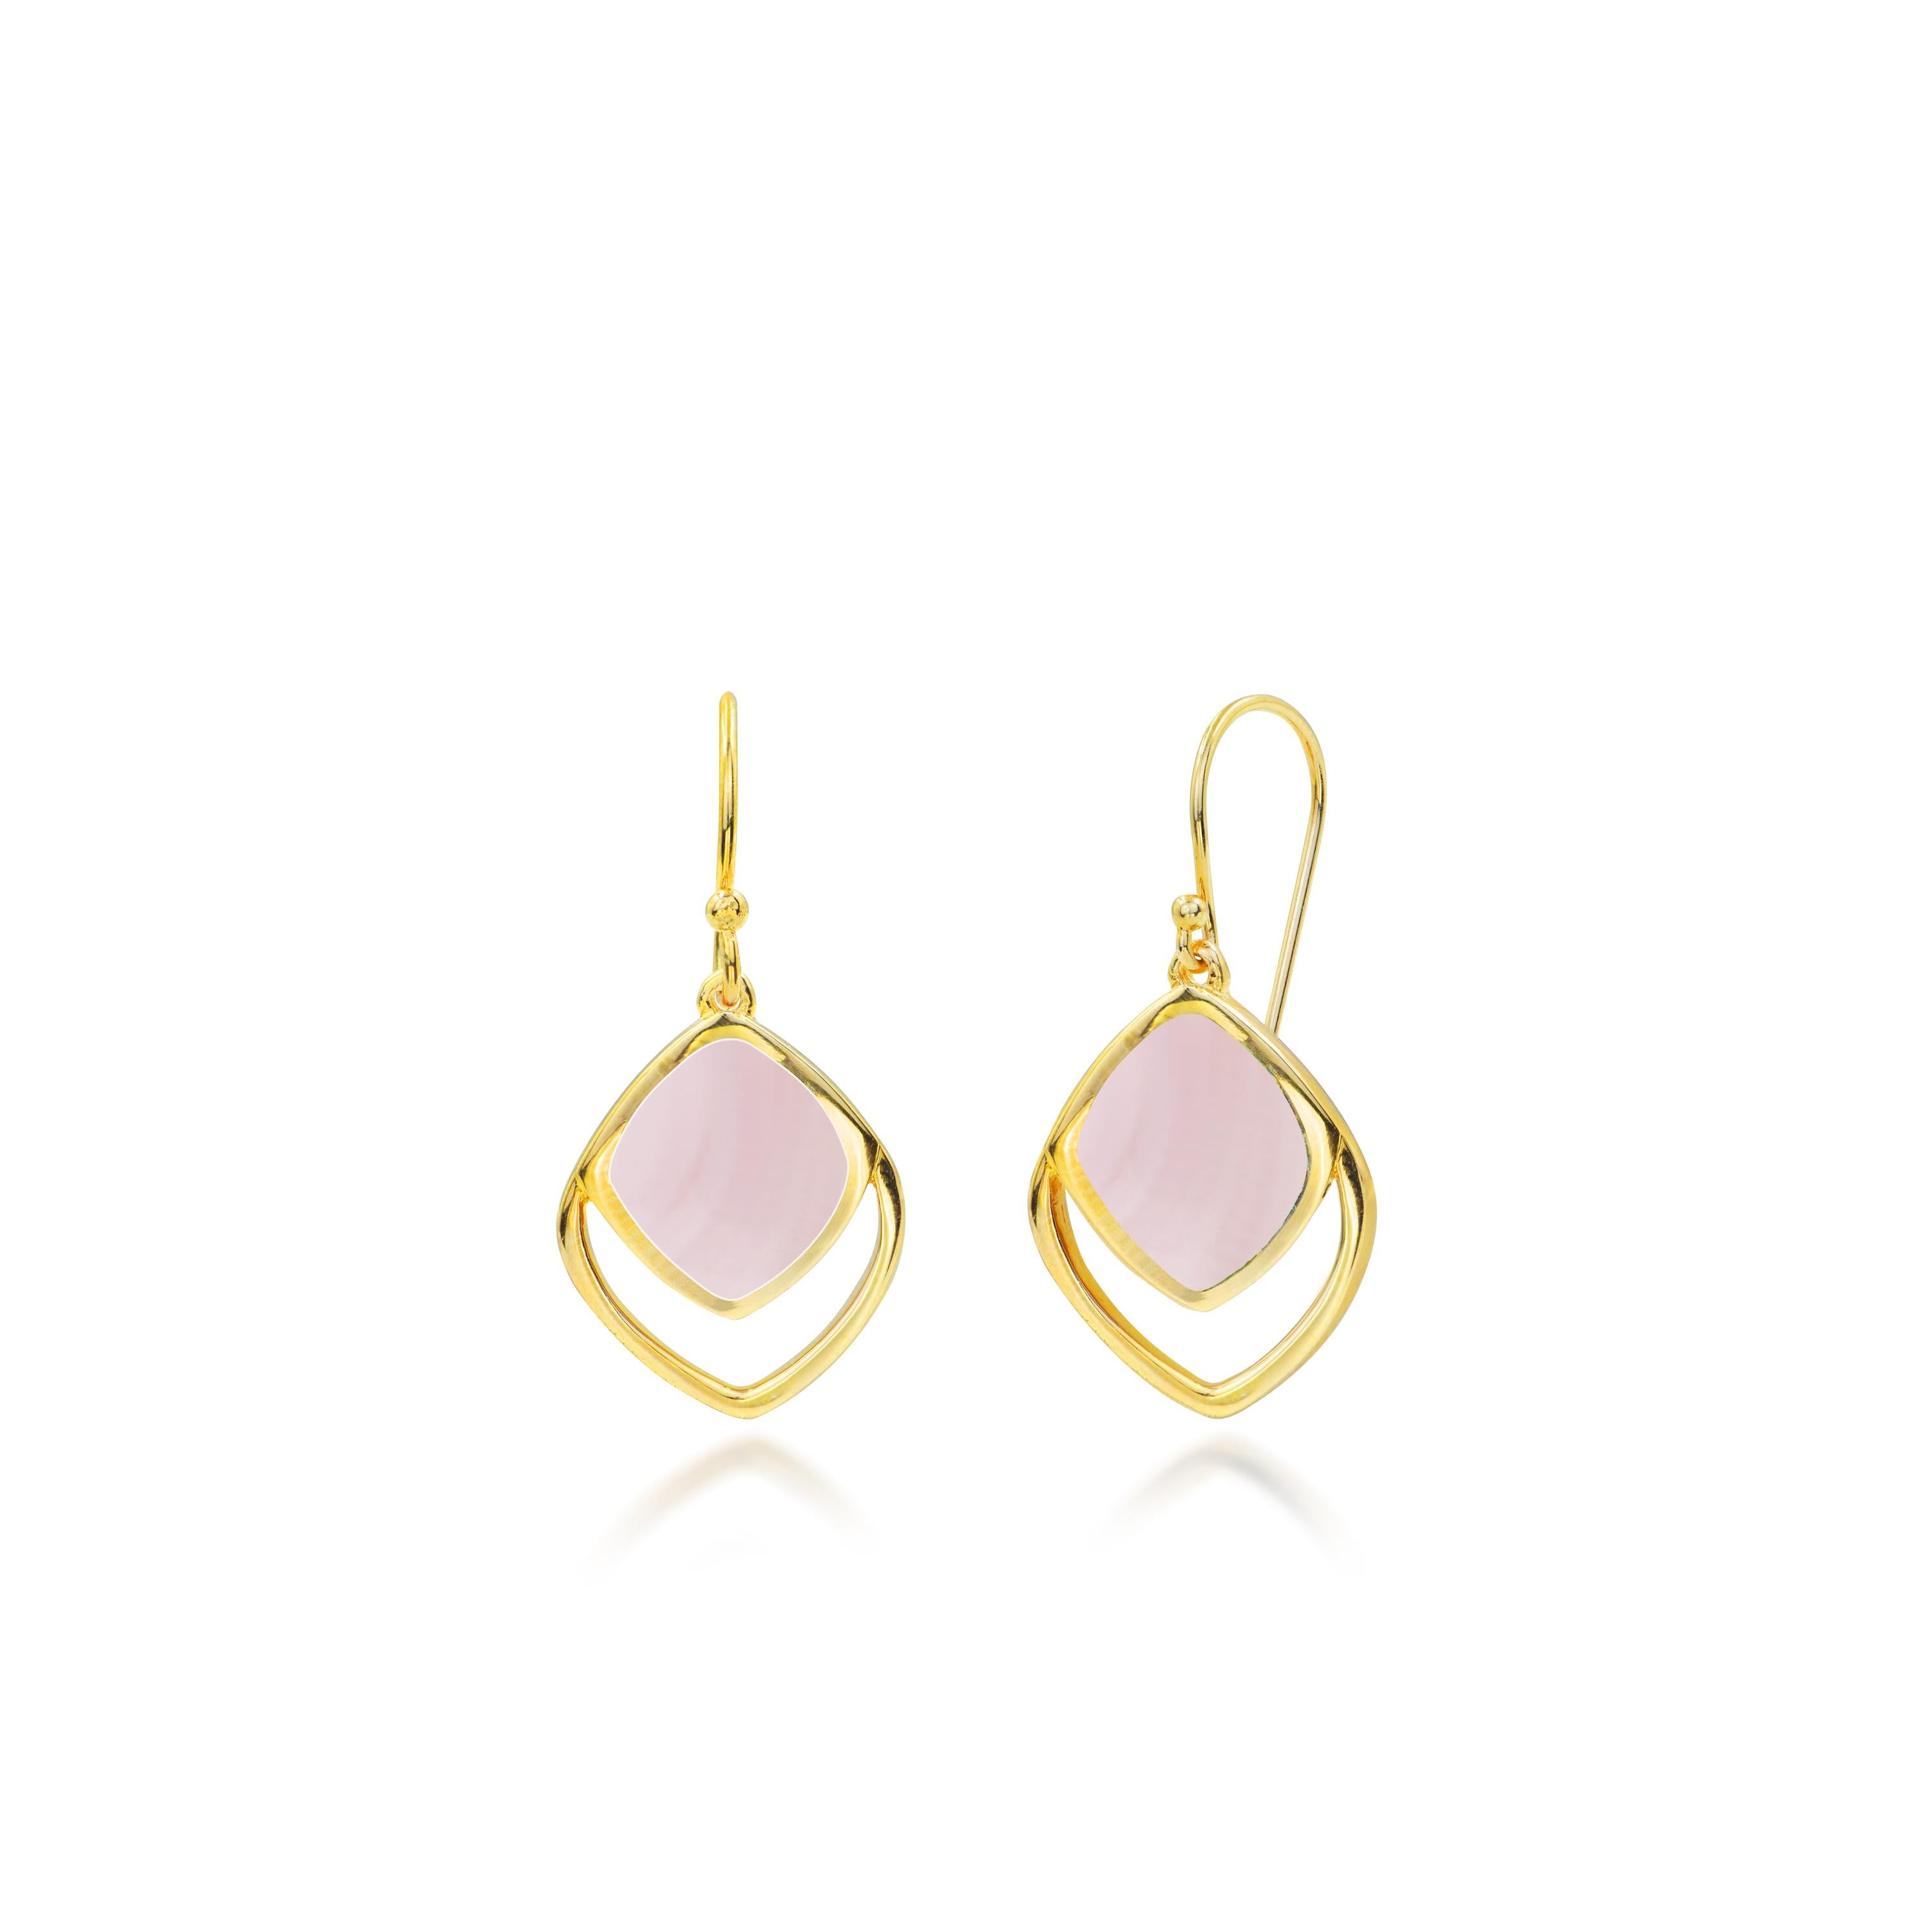 Uncut 18k Gold filled Geometric Dangle earrings with MOP Abalone Pink Shell Black Onyx For Sale